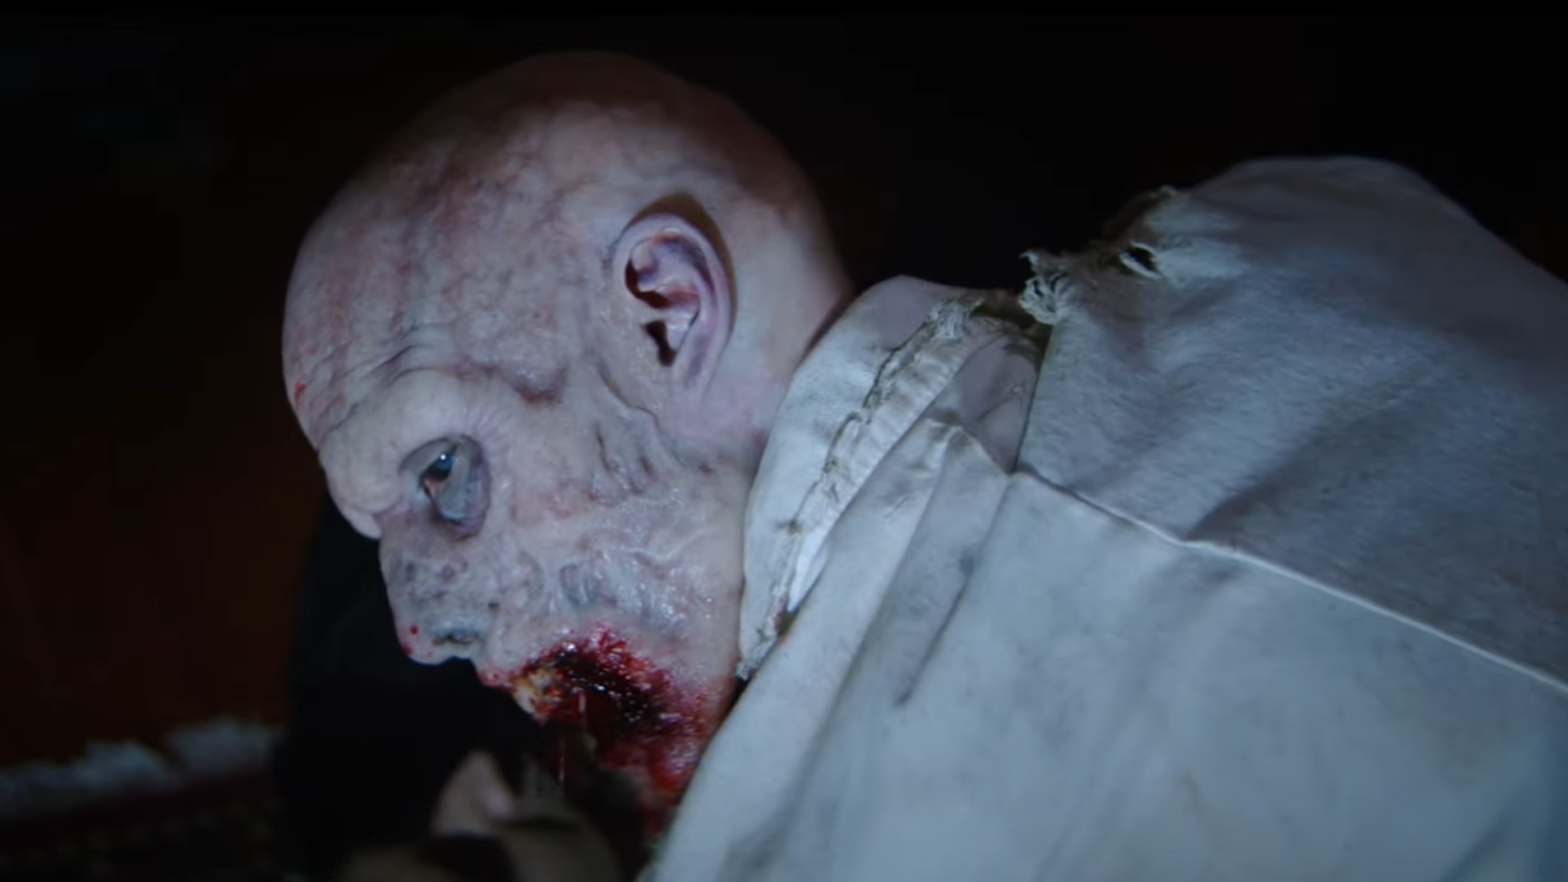 Resident Evil's iconic first zombie reveal, recreated. (Screenshot: Sony Pictures)